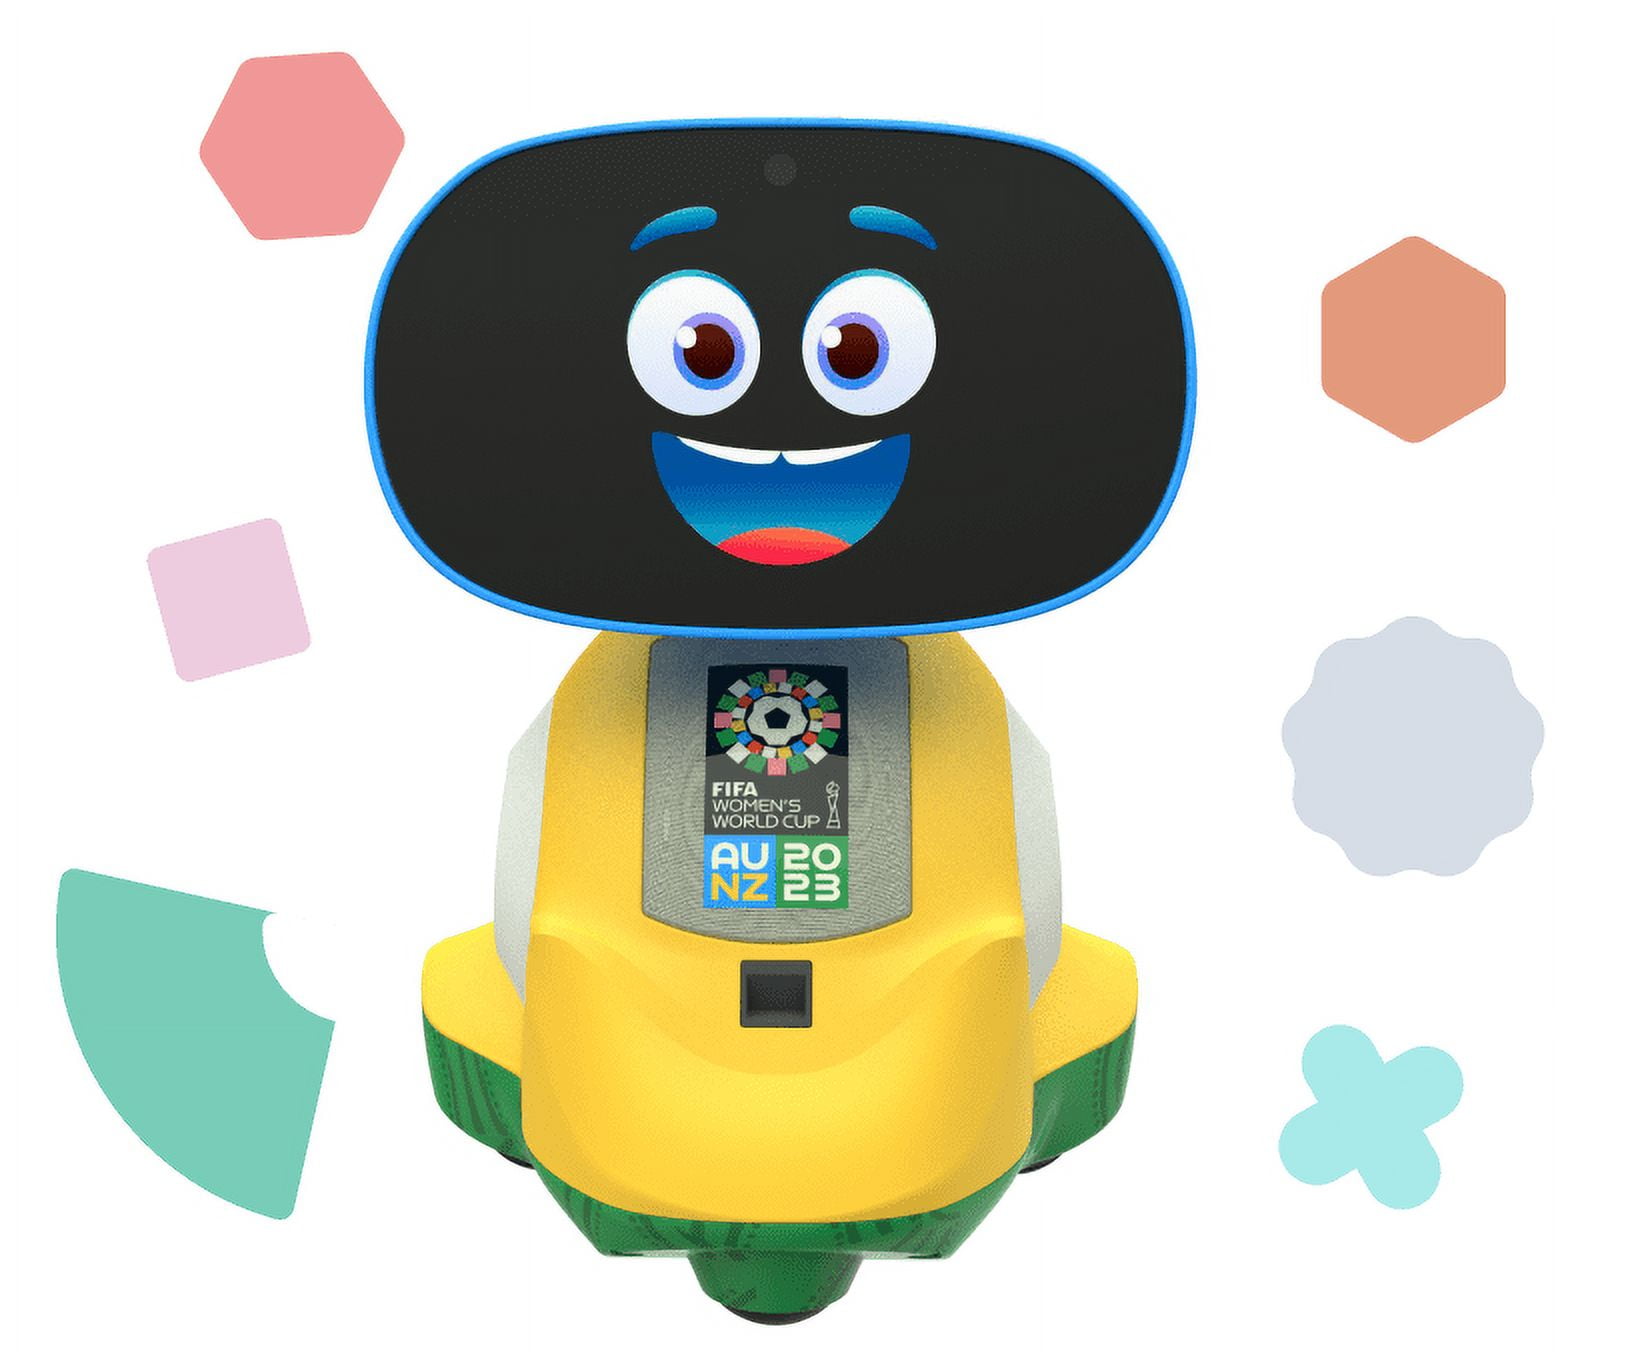 Miko 3 Robot Initiates Conversation and Helps Kids Learn - The Toy Insider